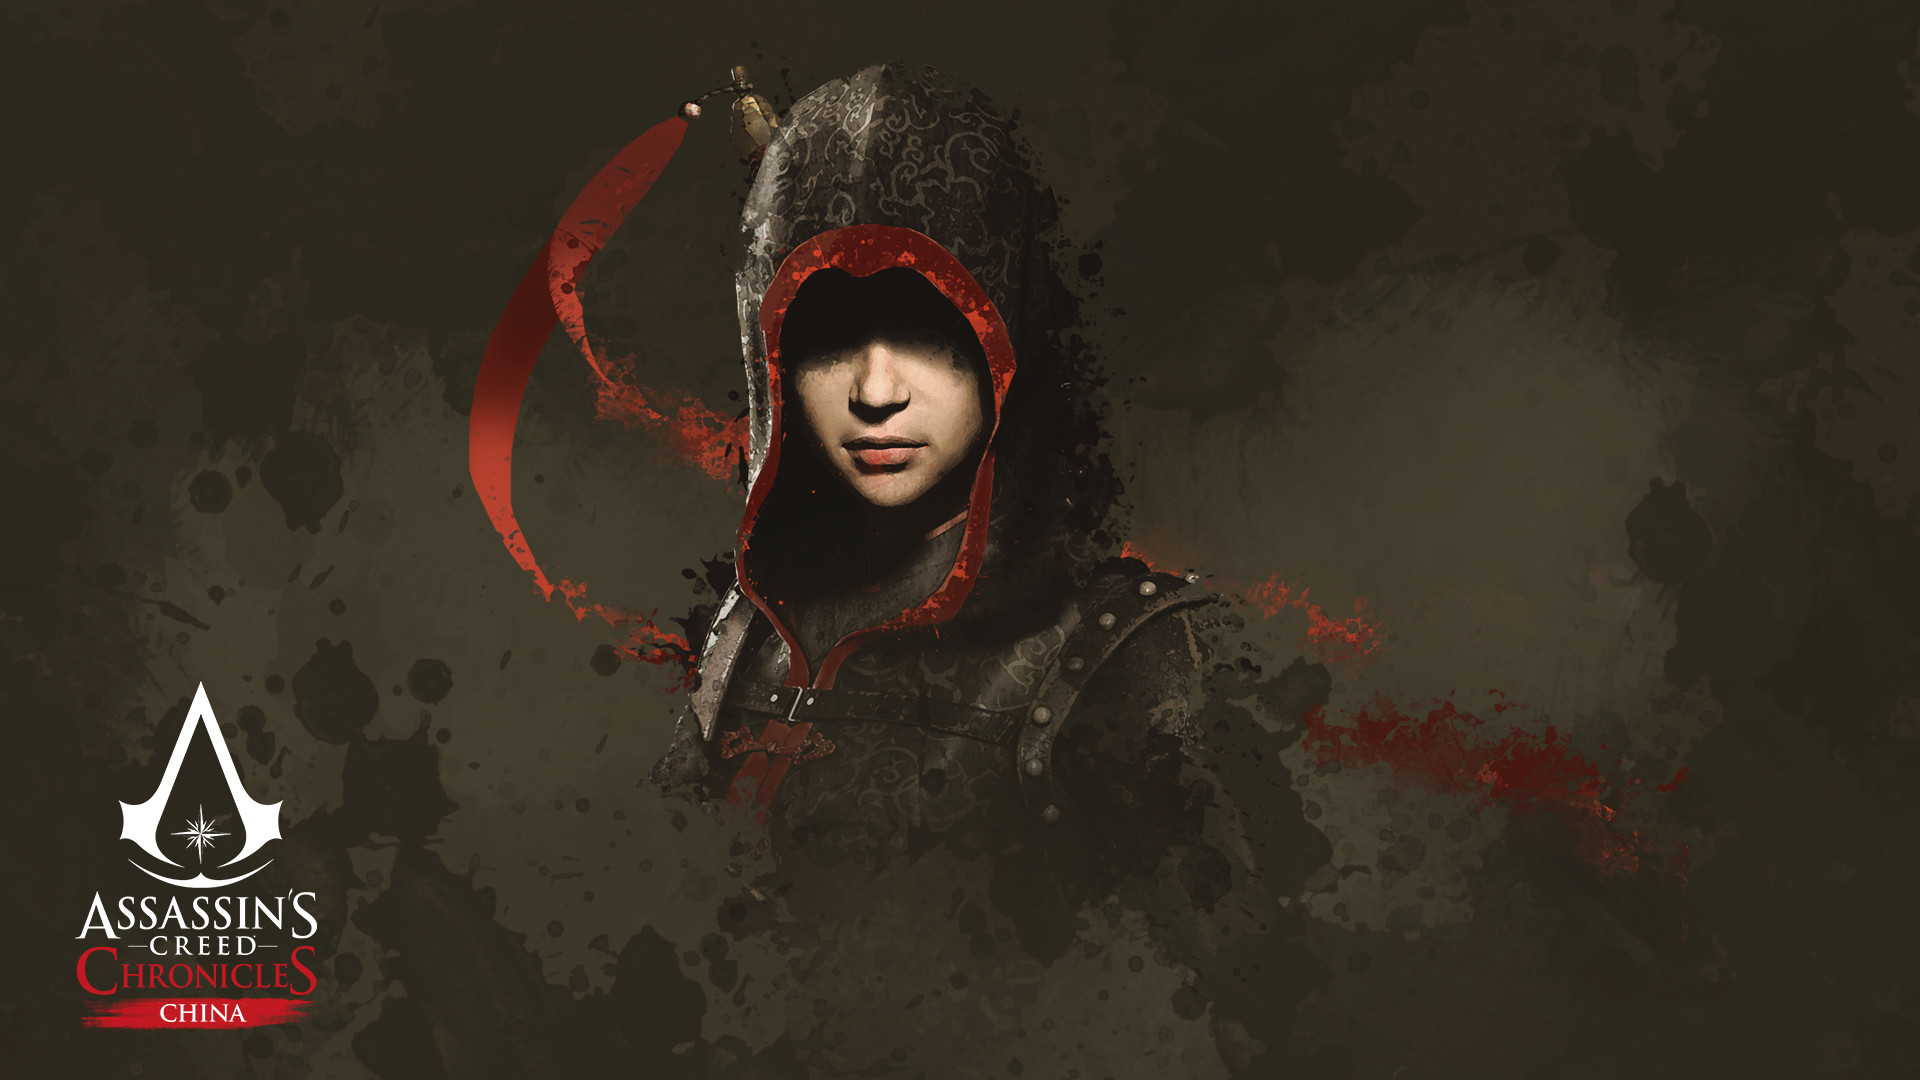 Wallpapers from Assassin's Creed Chronicles: China 